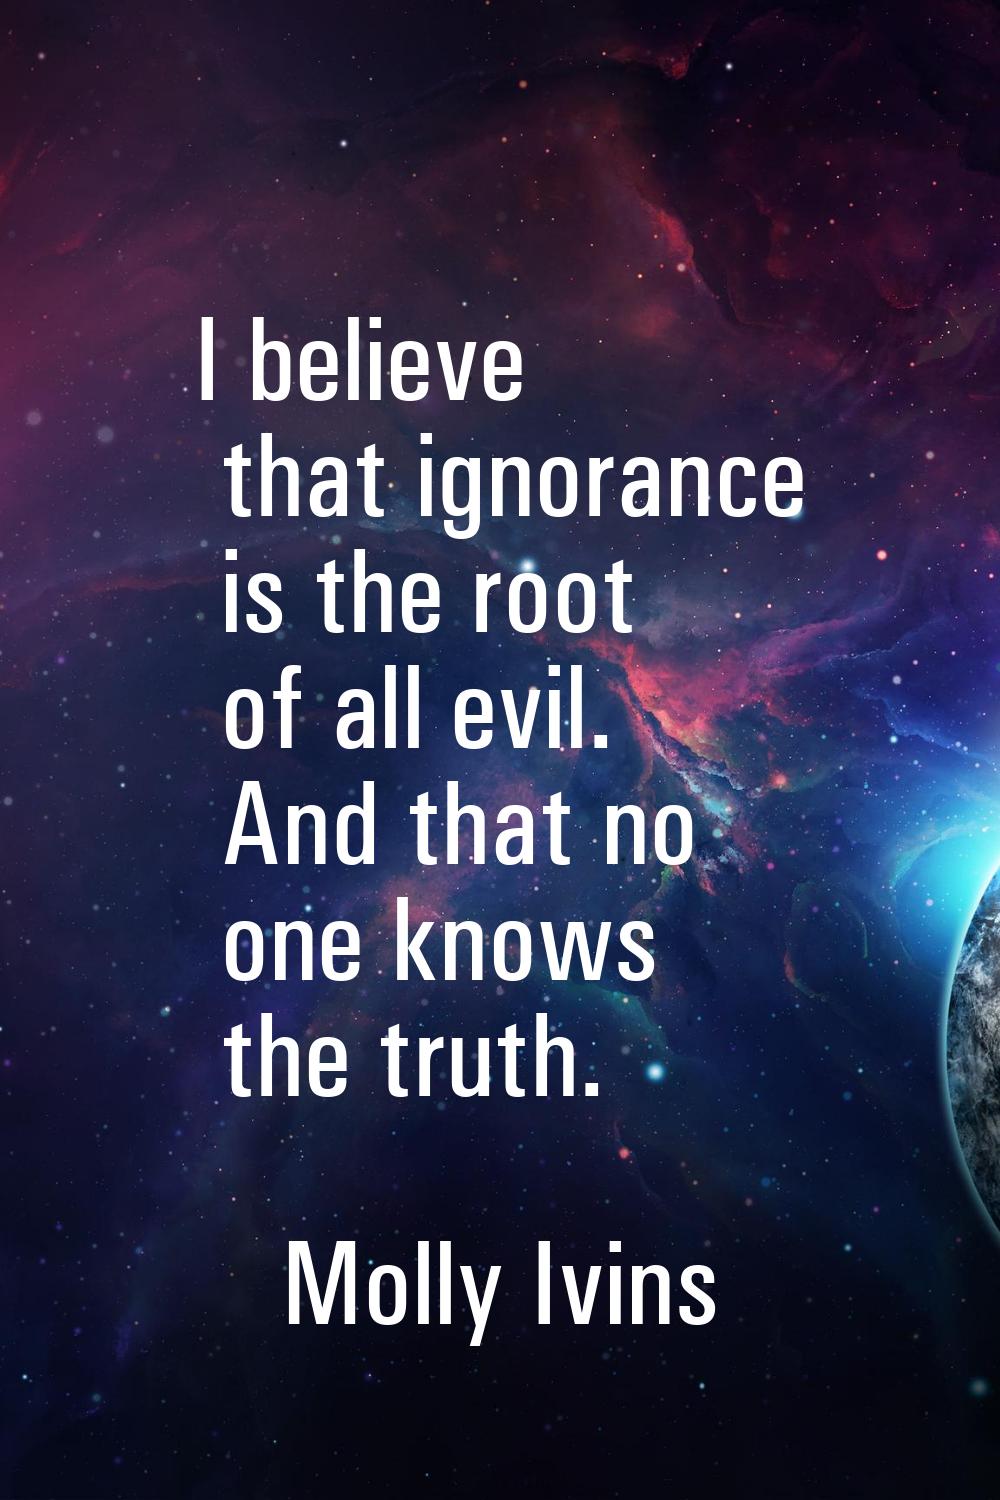 I believe that ignorance is the root of all evil. And that no one knows the truth.